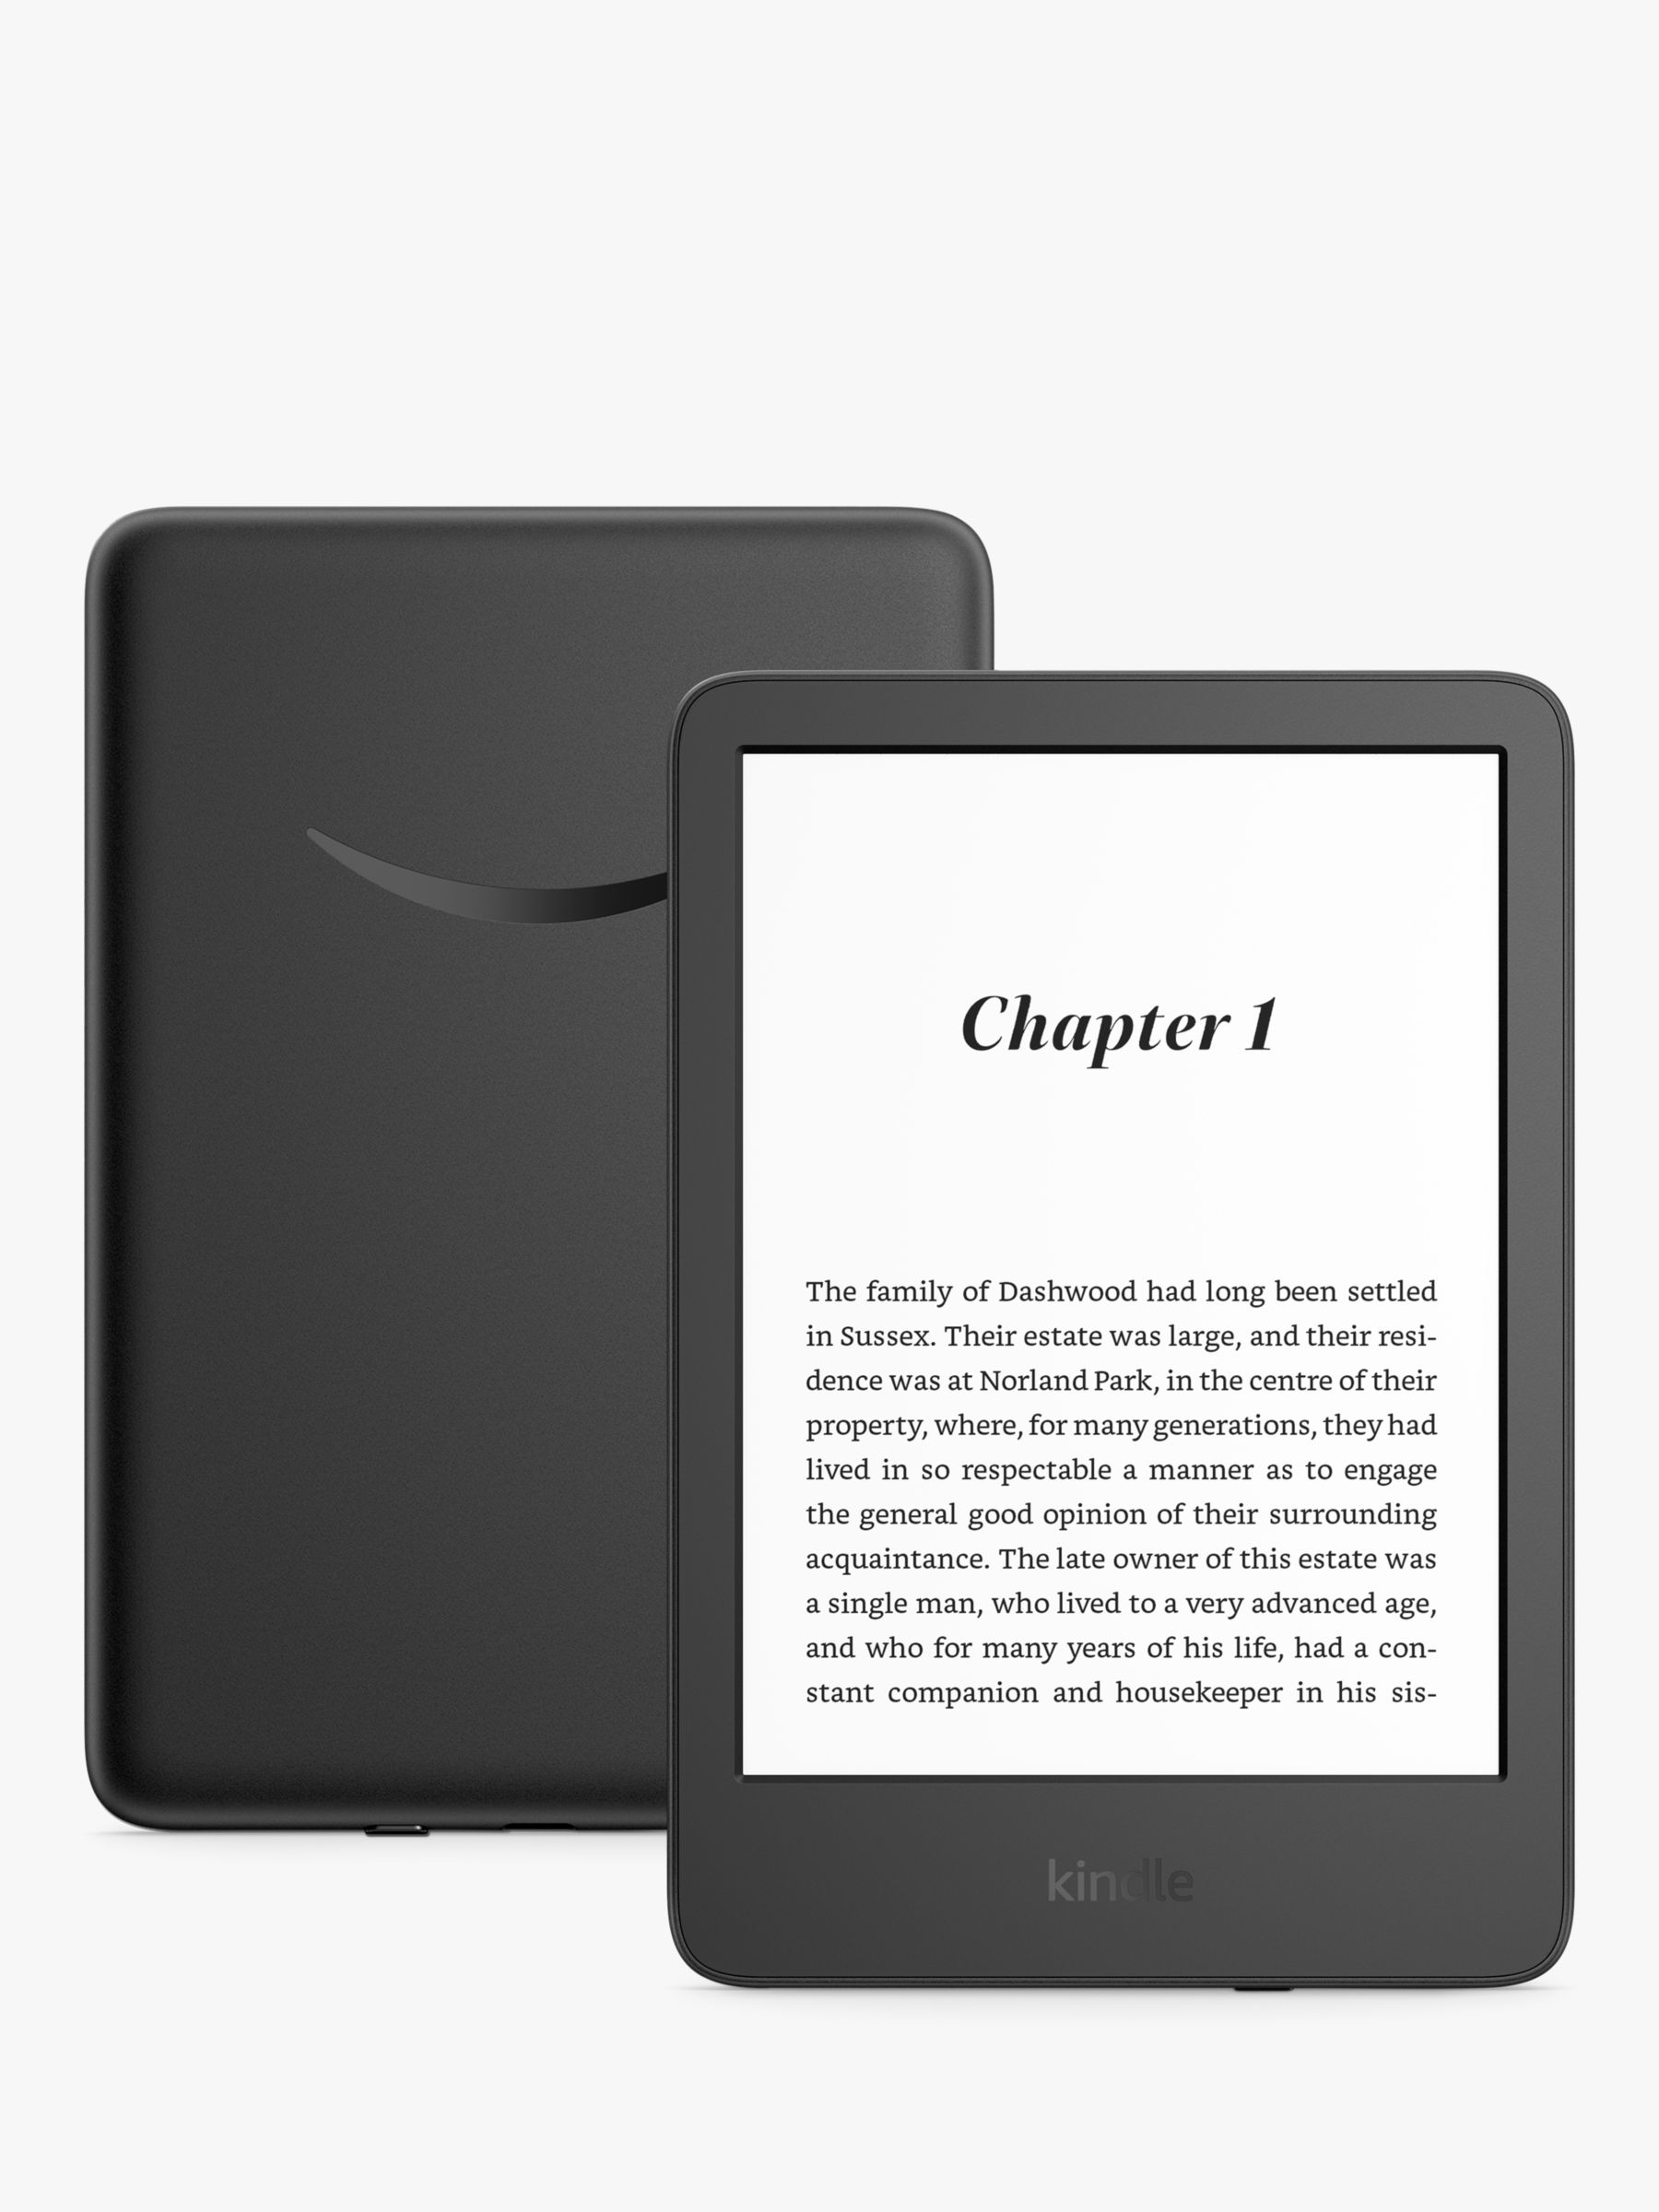 Kindle 11 (2022) – things to know before buying it – Ebook Friendly